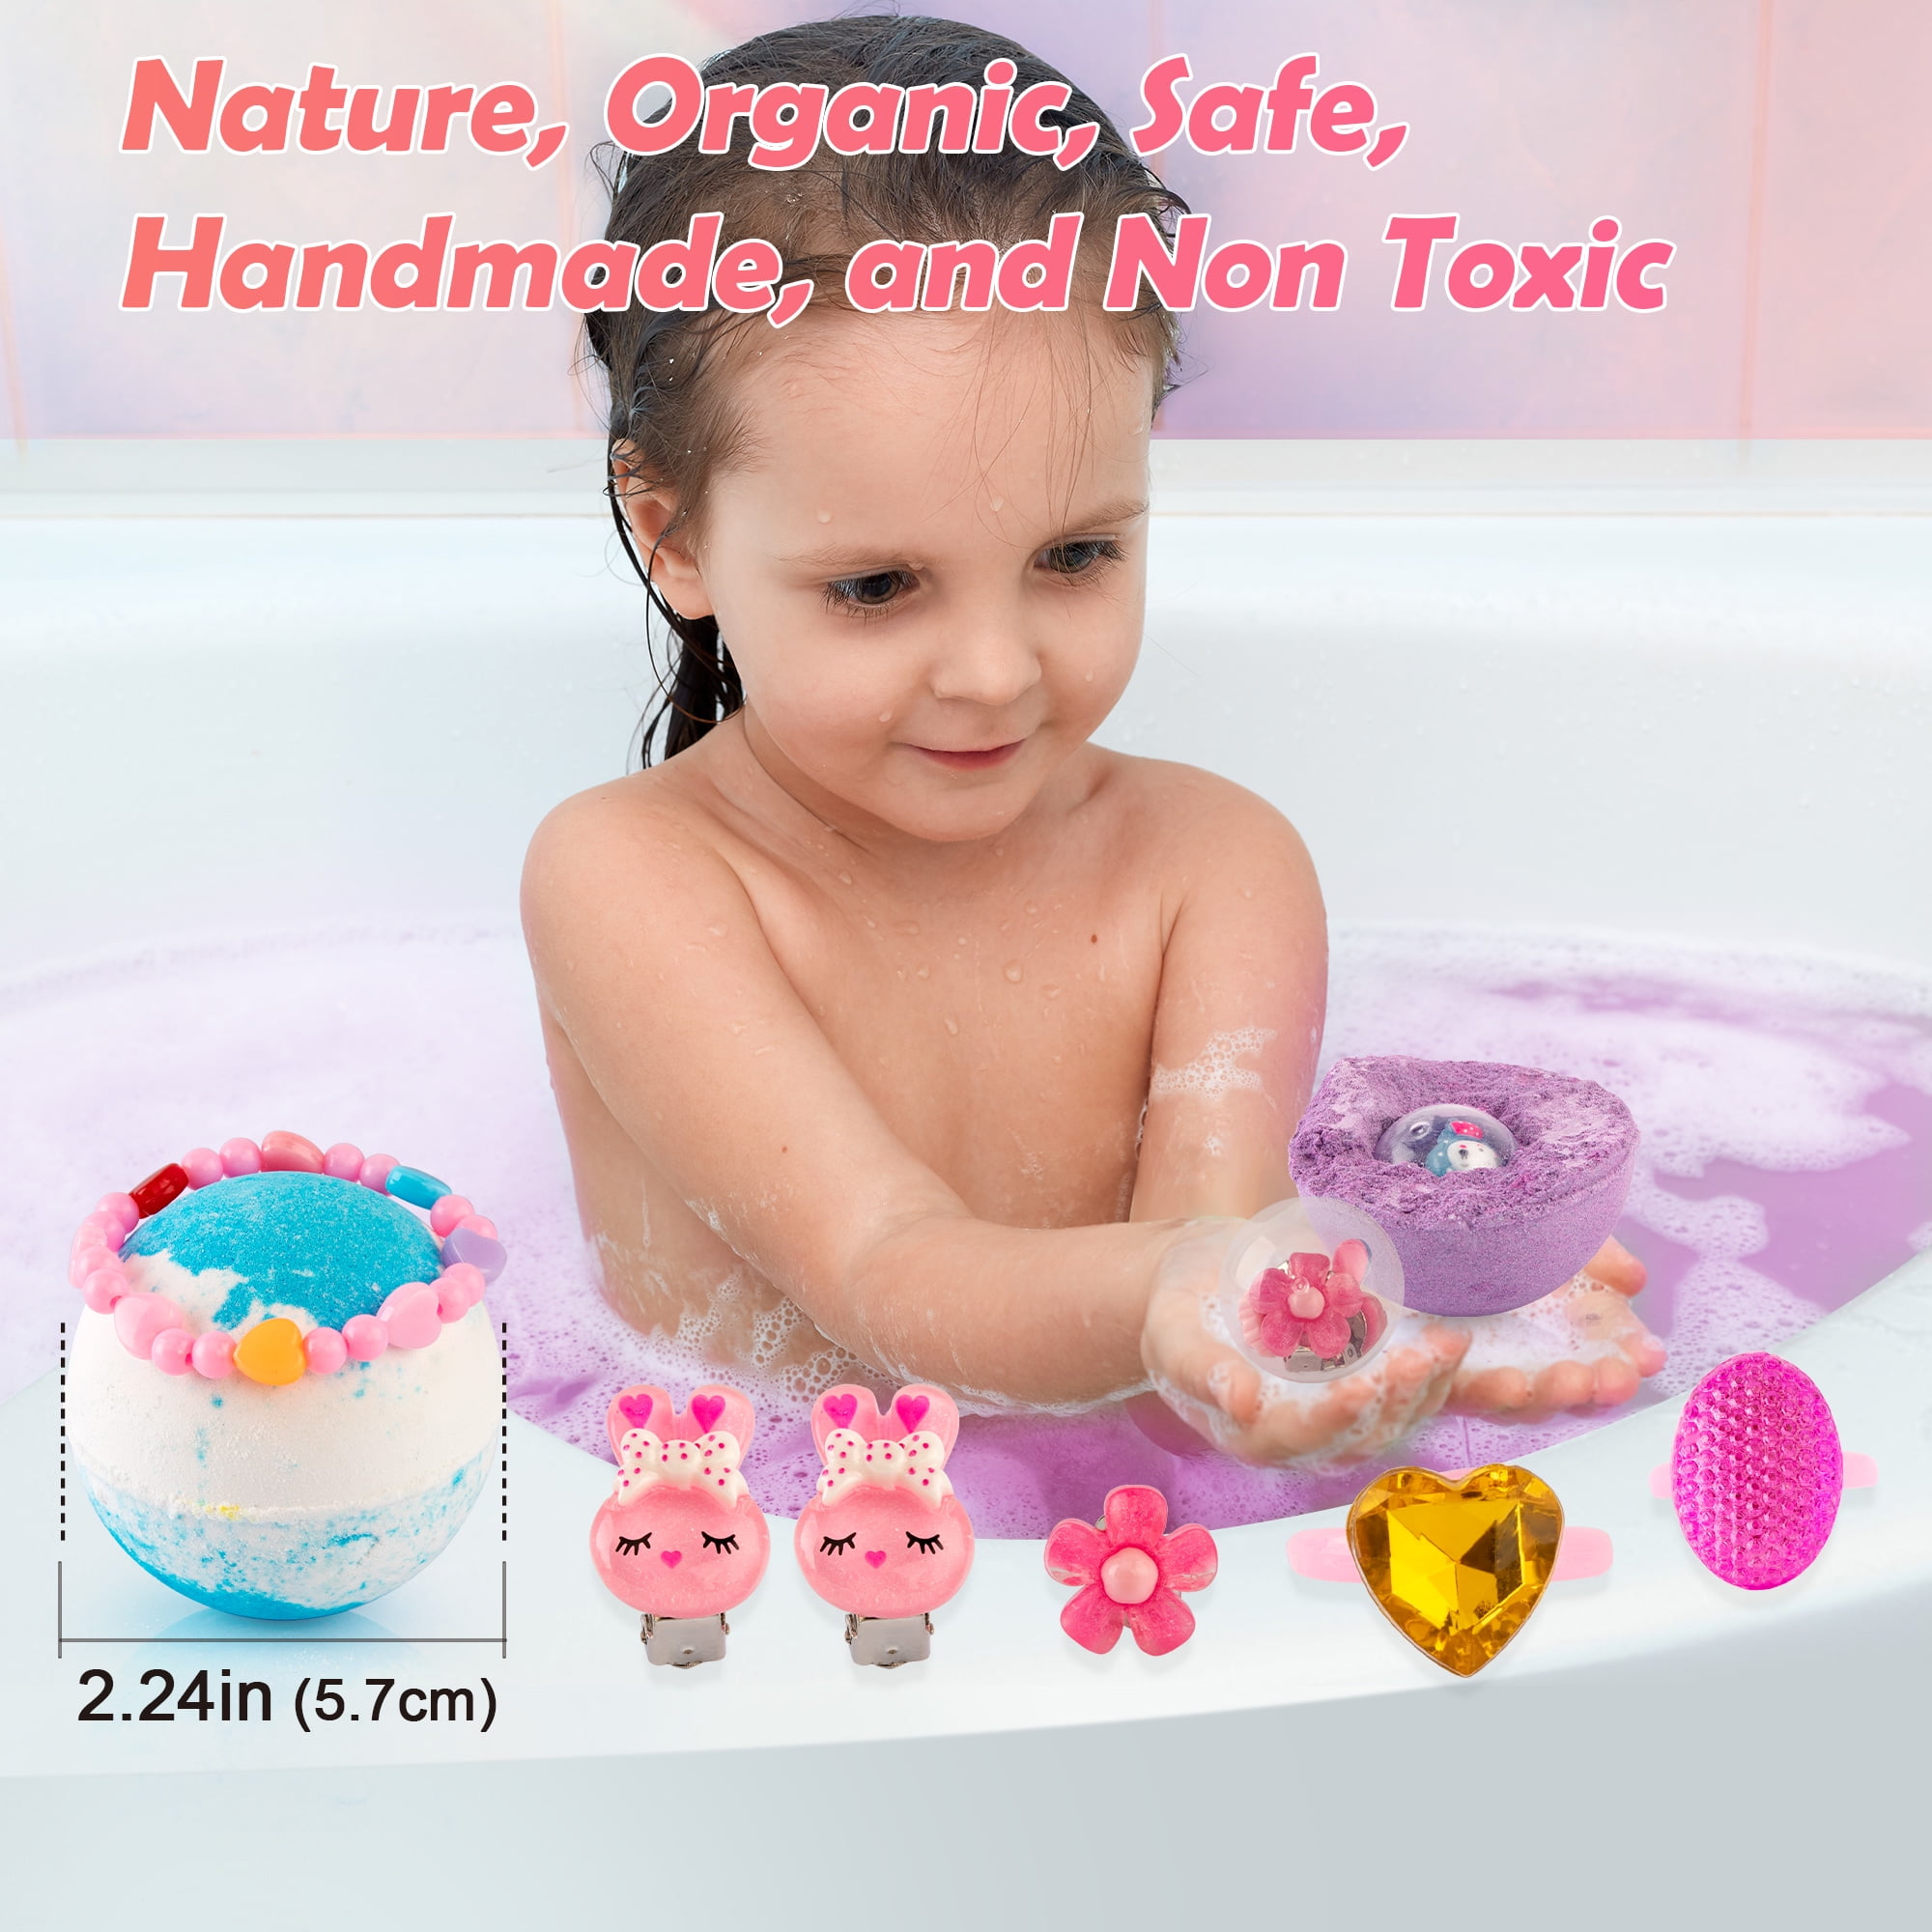 Bath Bombs (Duck) for Kids - Bubble Bath Kids Include 12 Natural Organic  Bathbombs - Ideal Gift as Bath Bomb Set or Bath Bombs Bulk - Bubble Bath  for Women and Kids by DonyaPri